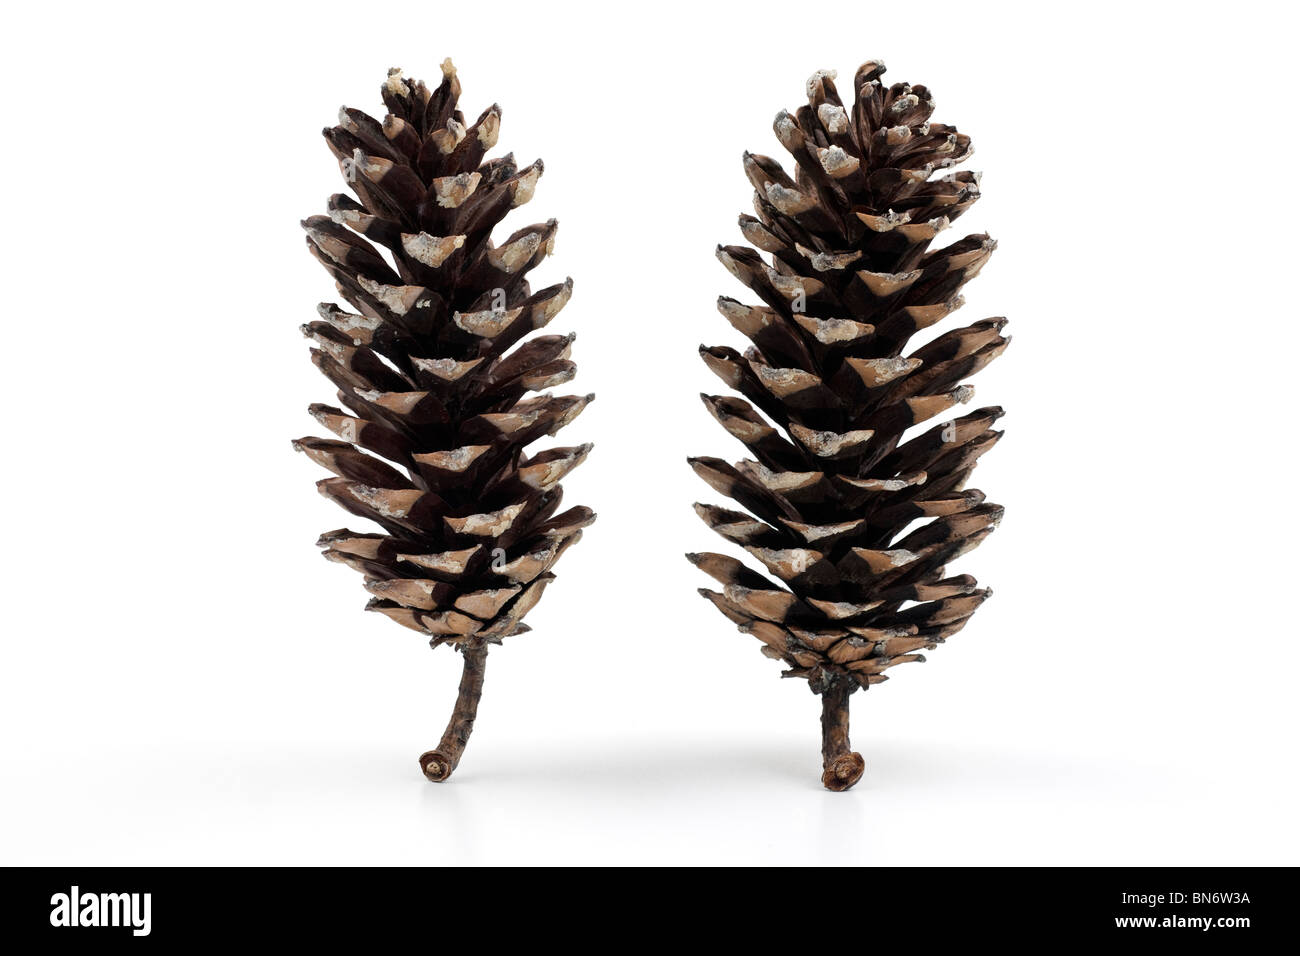 Two upright open pine cones Stock Photo